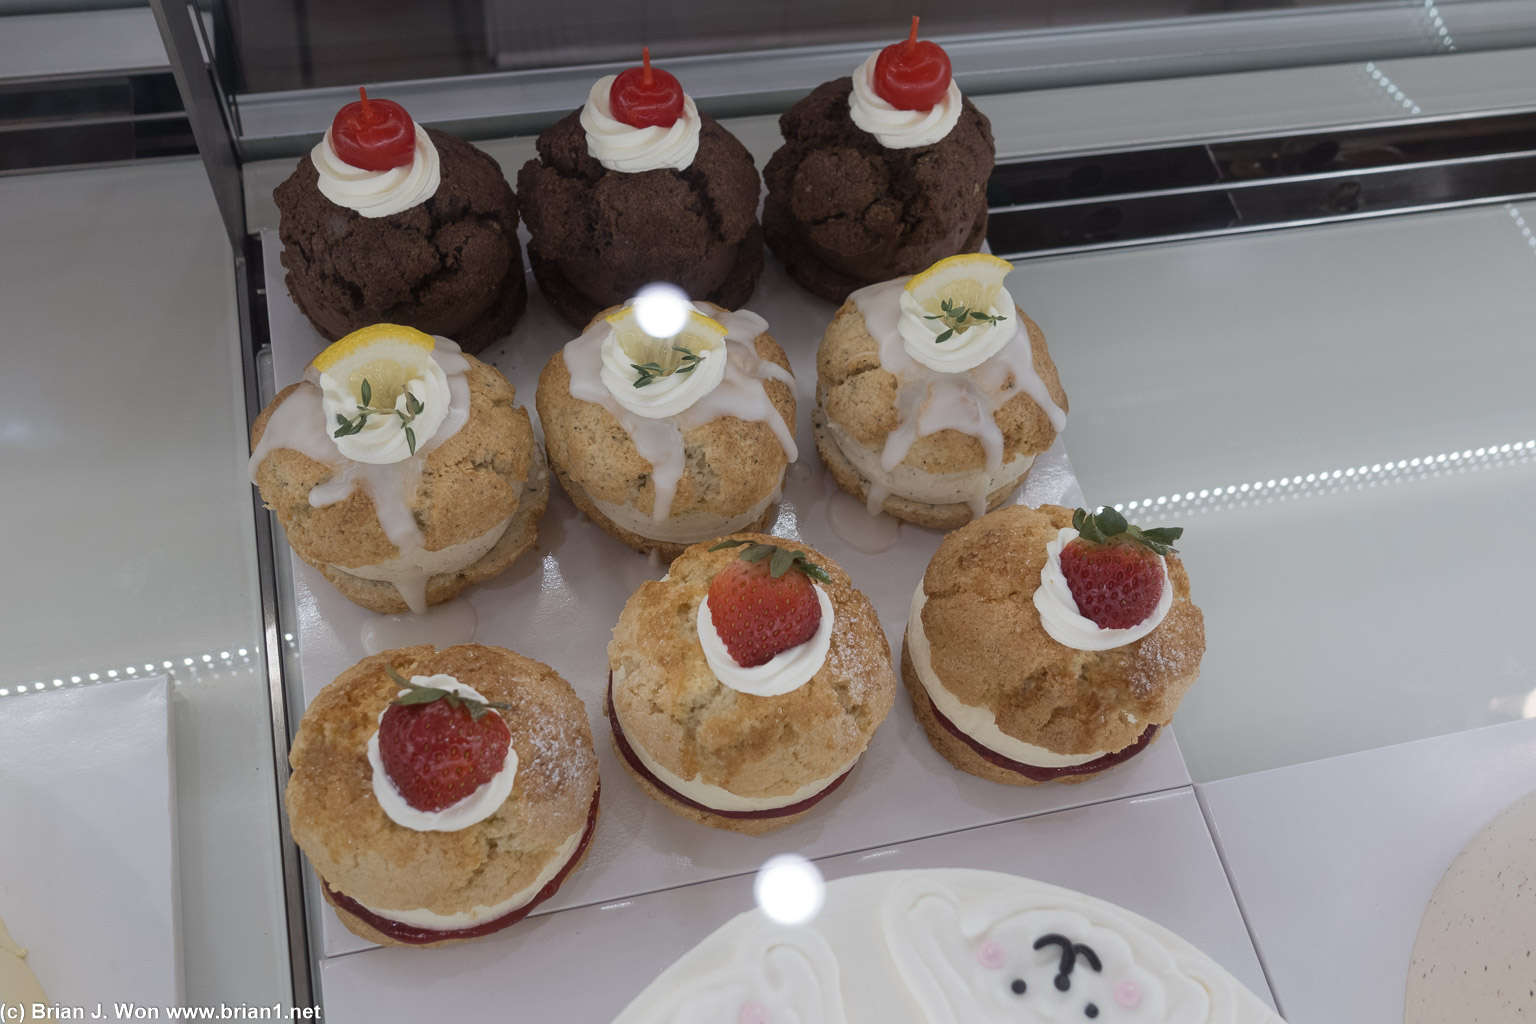 Scones. Strawberry, chocolate, not sure what the other one?